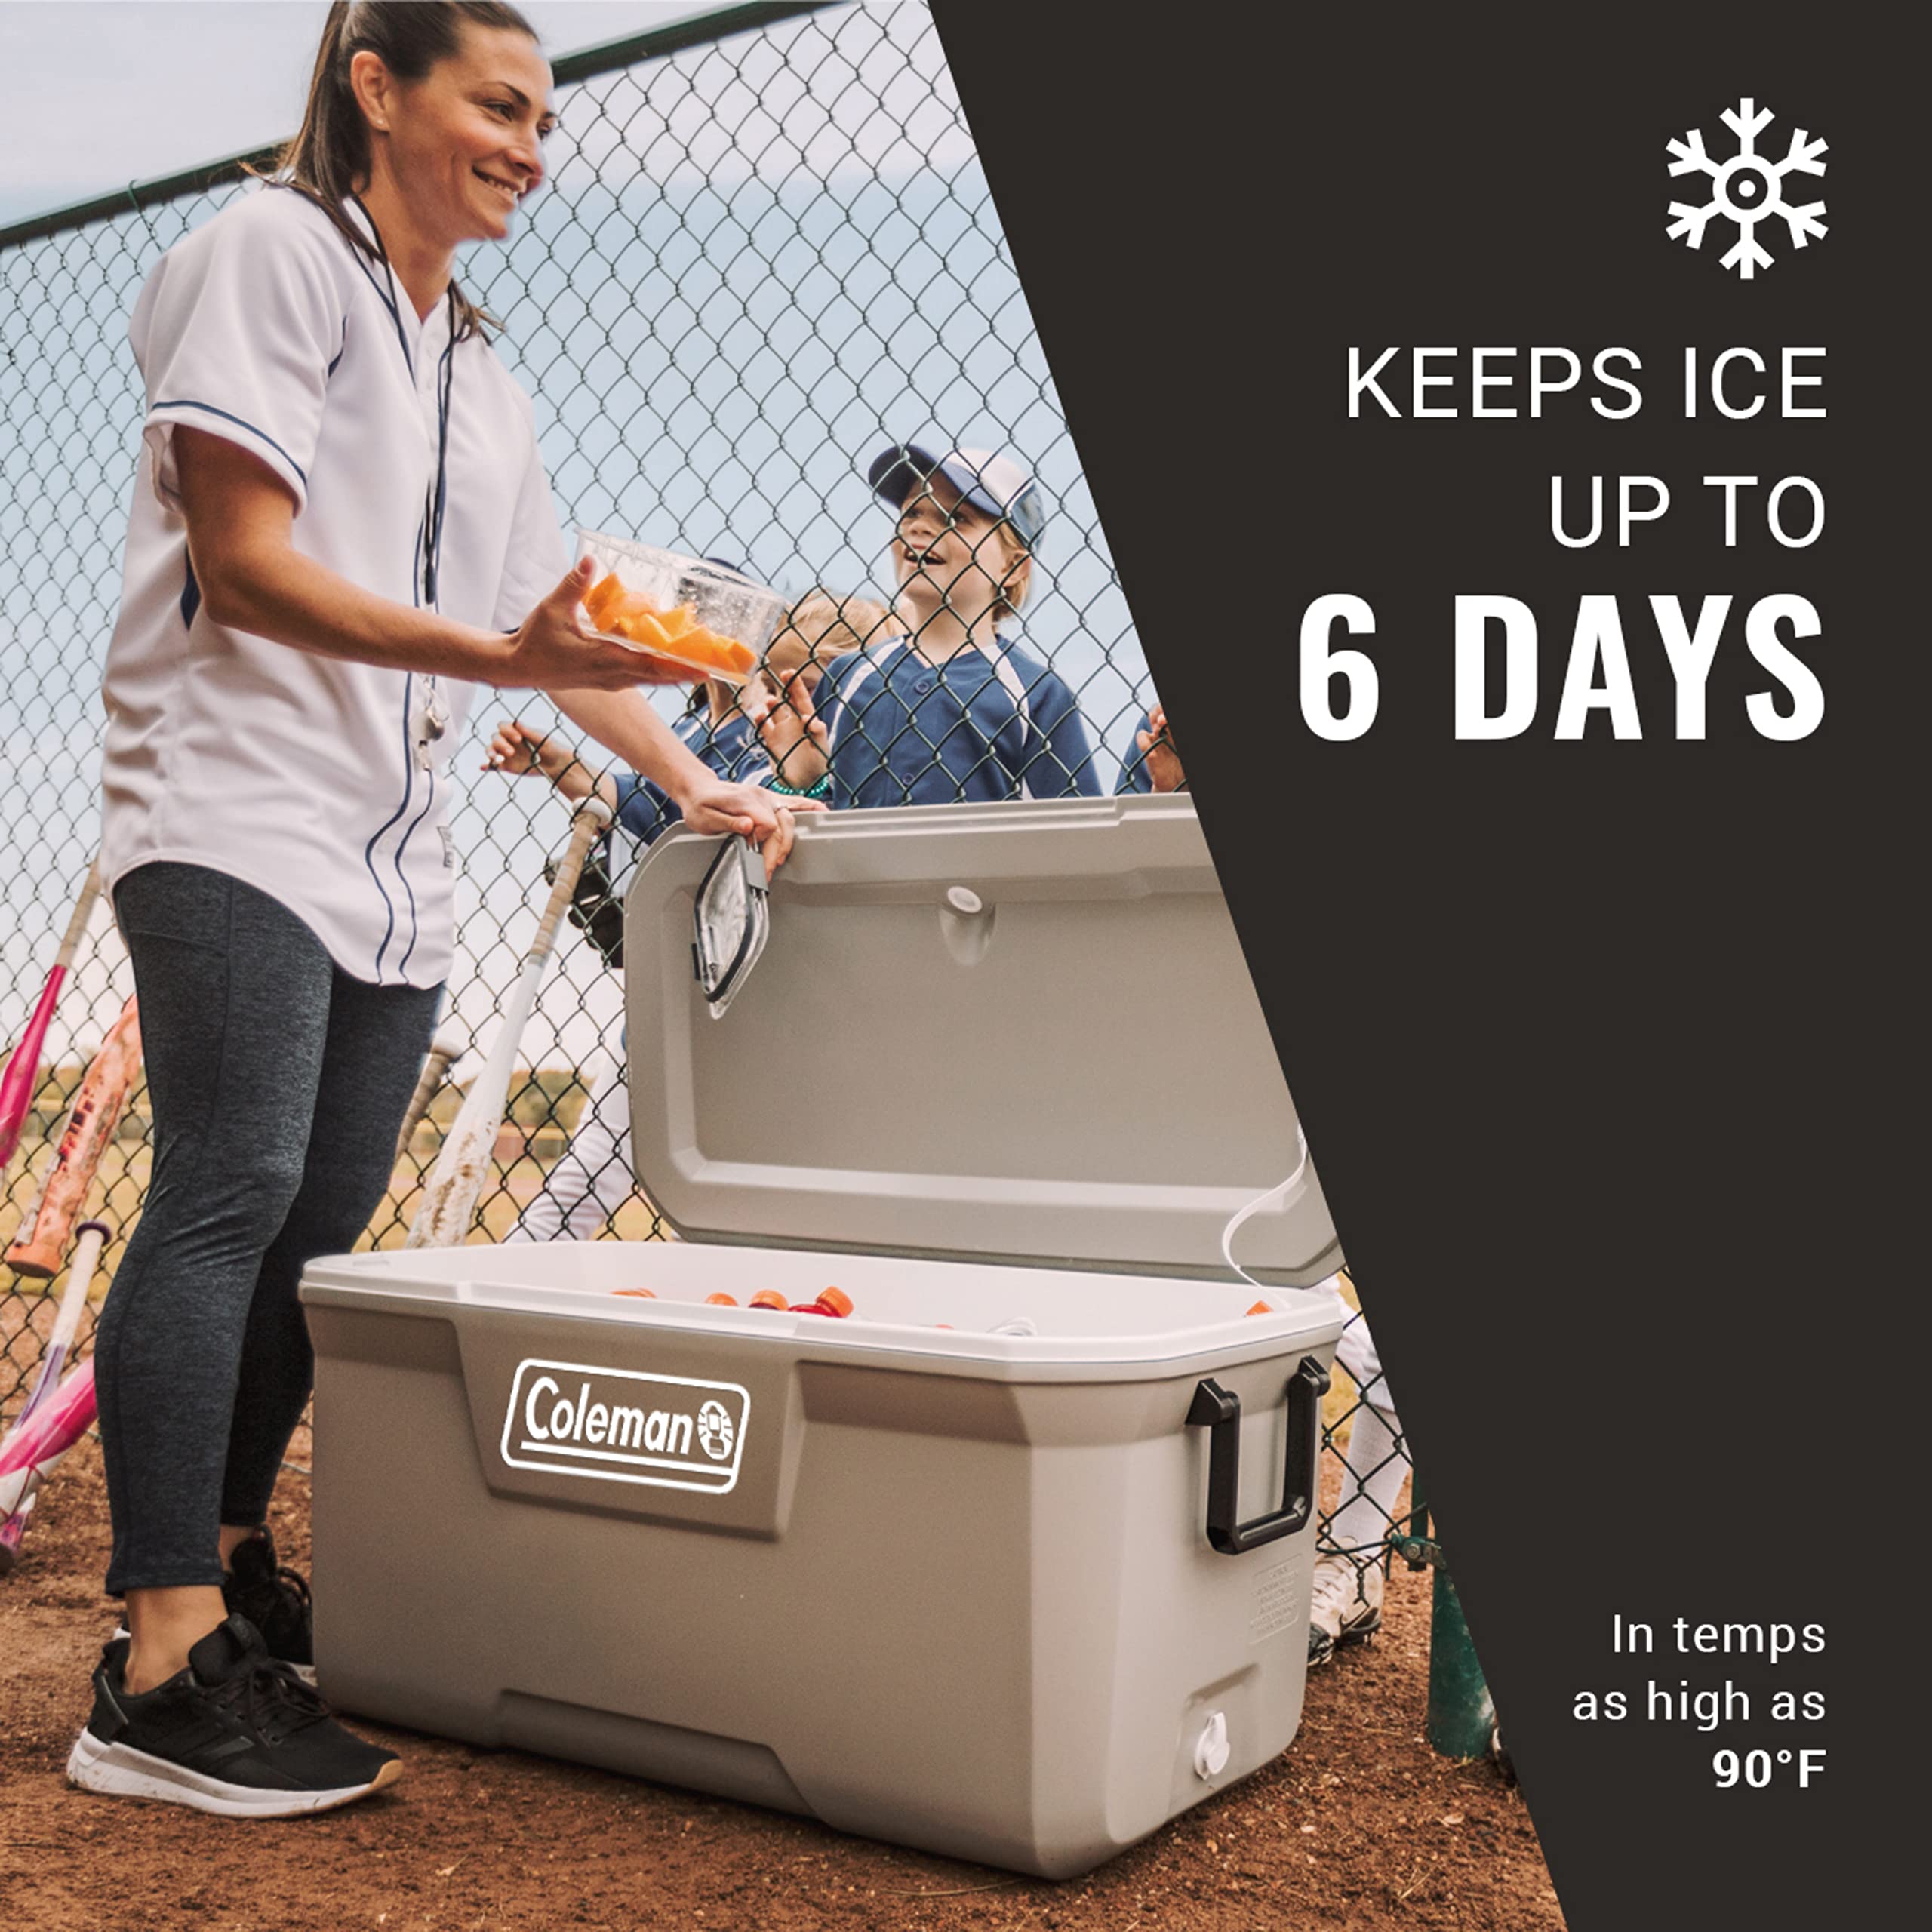 Coleman 316 Series Insulated Portable Cooler with Heavy Duty Latches, Leak-Proof Outdoor High Capacity Hard Cooler, Keeps Ice for up to 5 Days